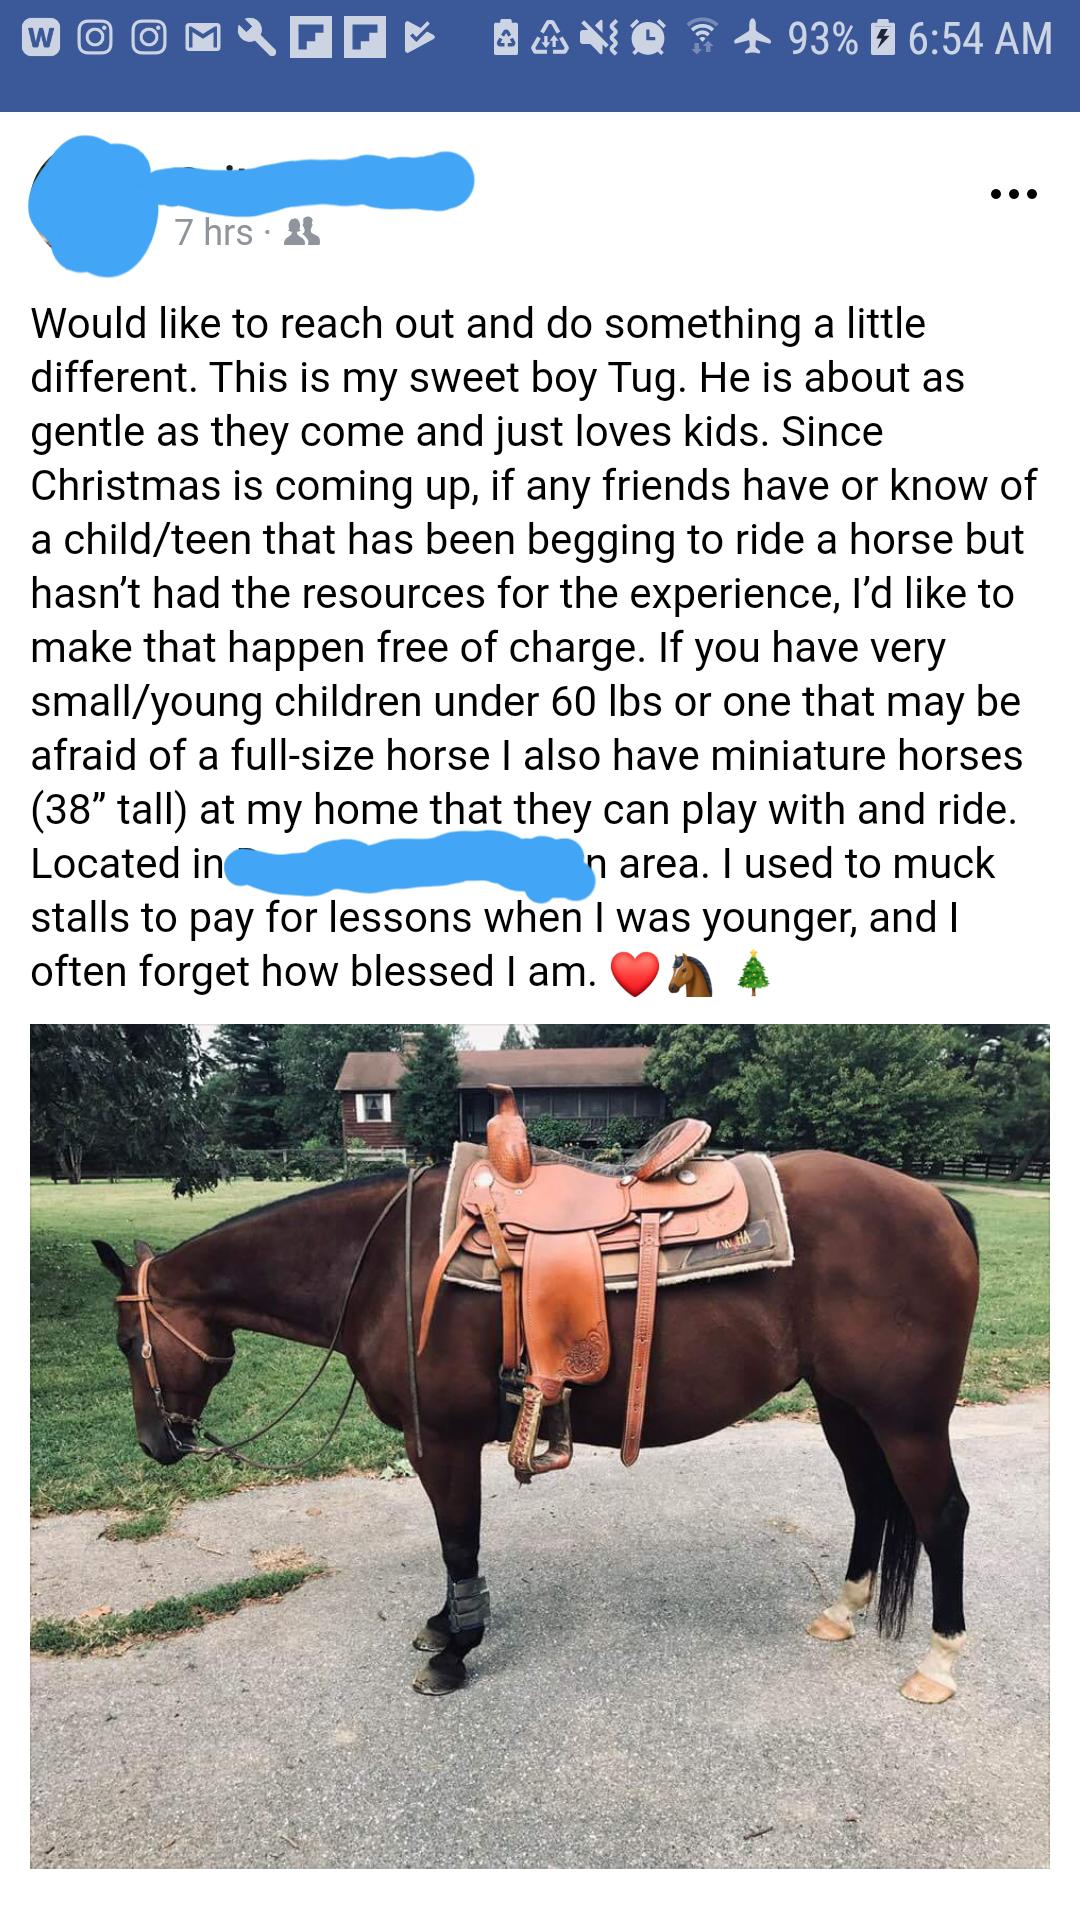 Horse people can be good people.